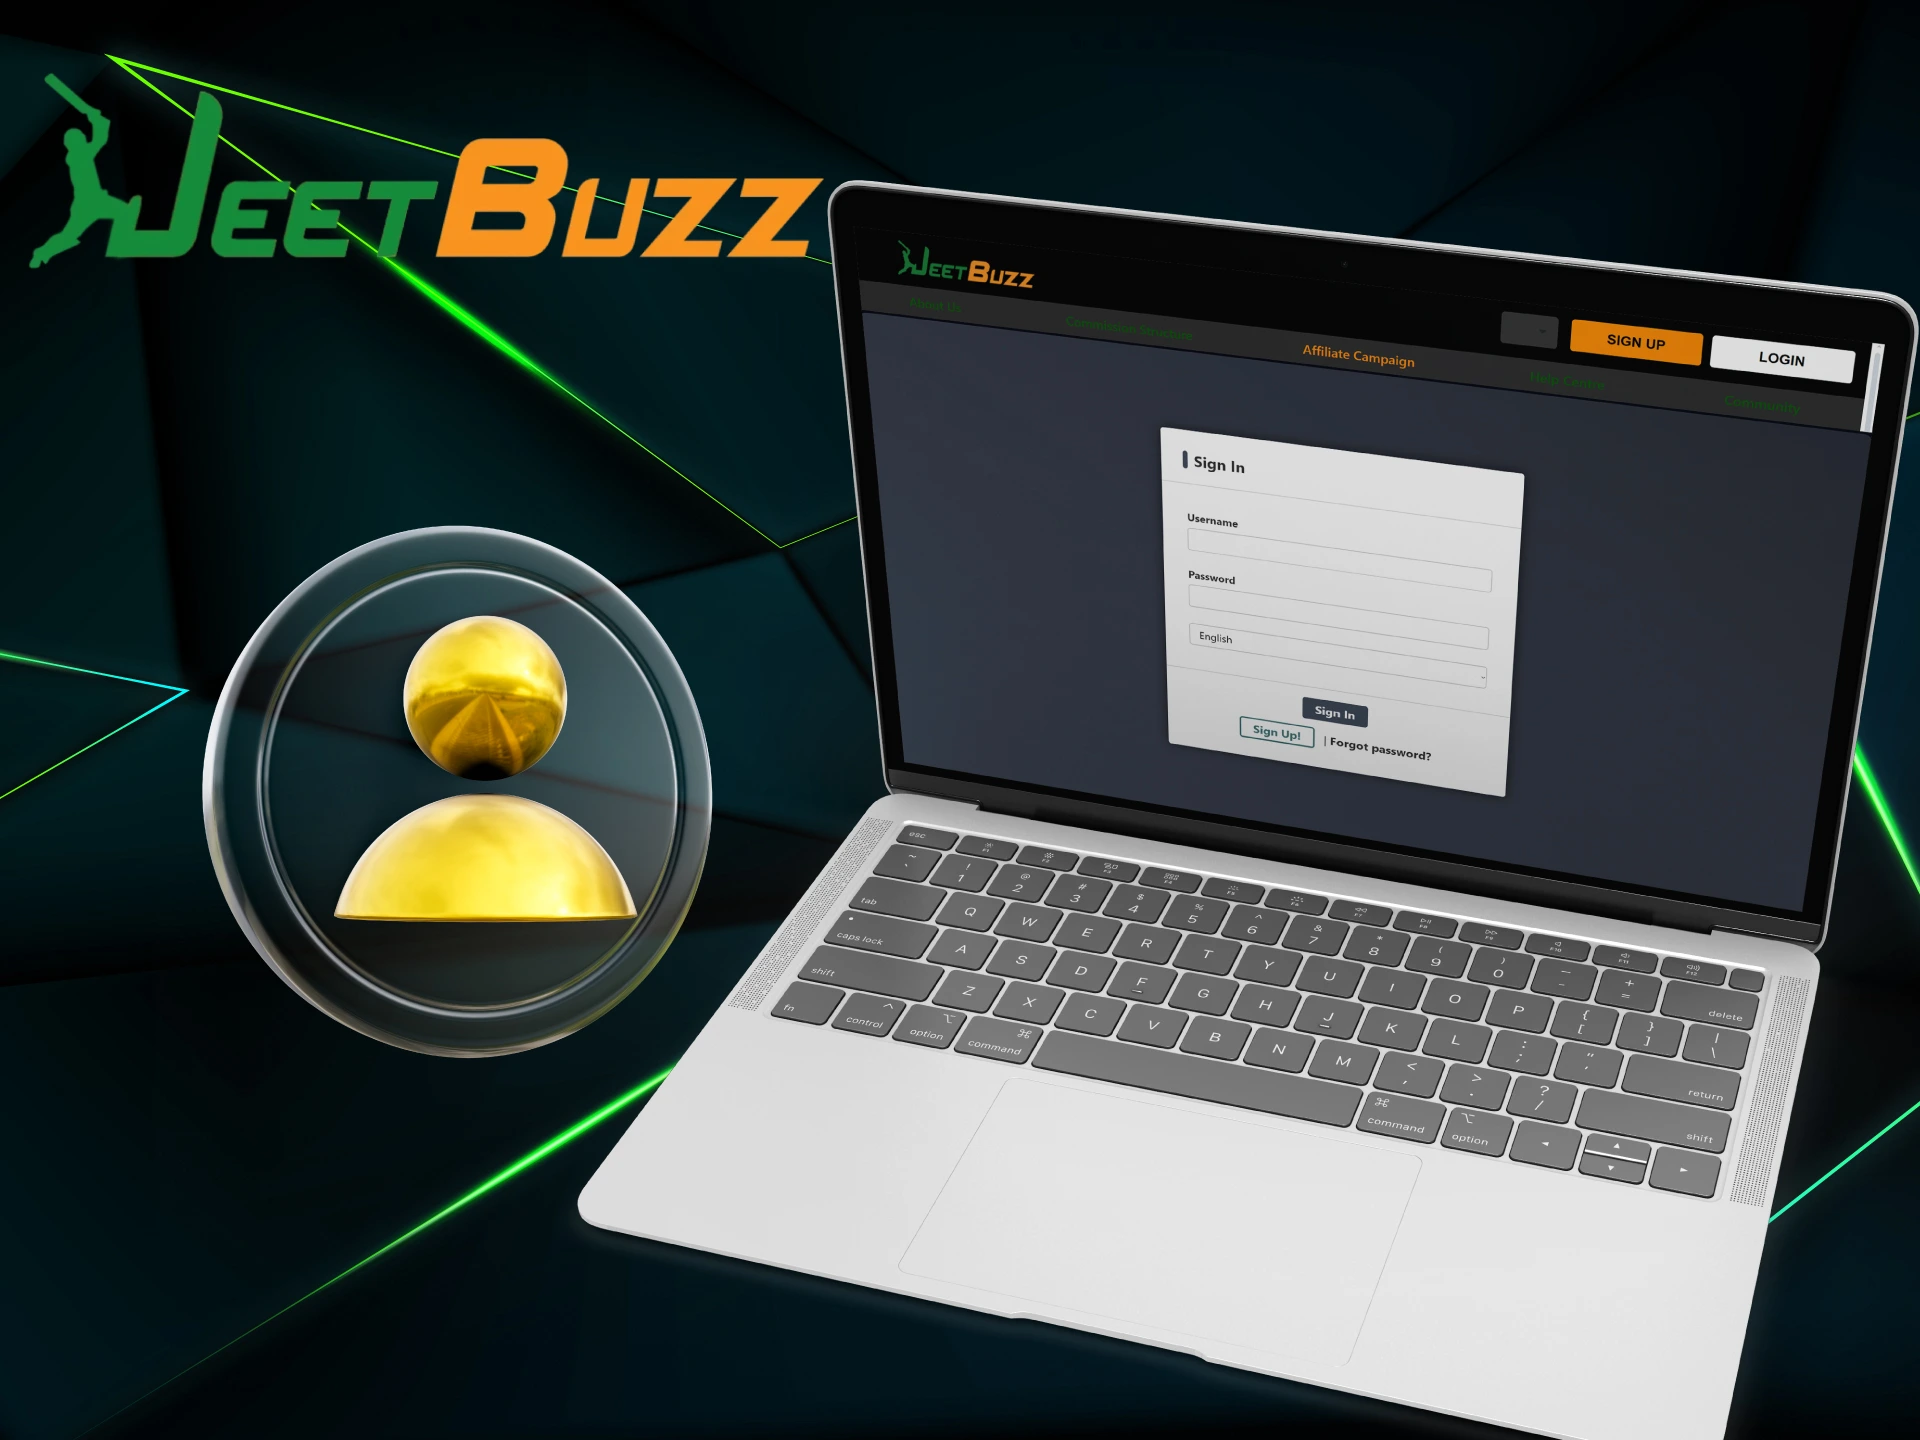 Enter your username, password and select your preferred language to sign up for the JeetBuzz affiliate program.